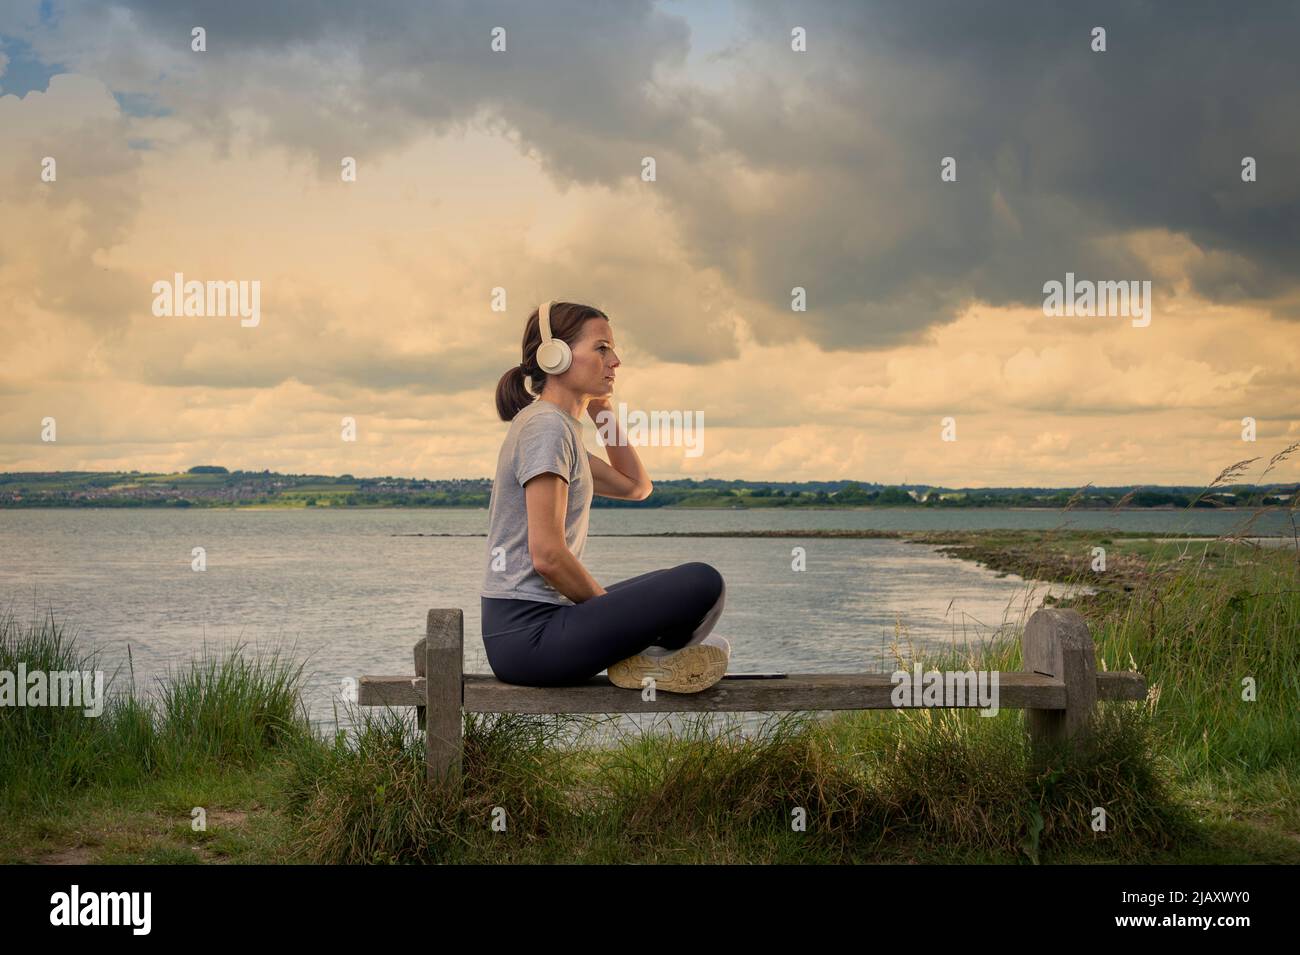 Single woman sitting on a bench beside water listening to music on her headphones. Stock Photo